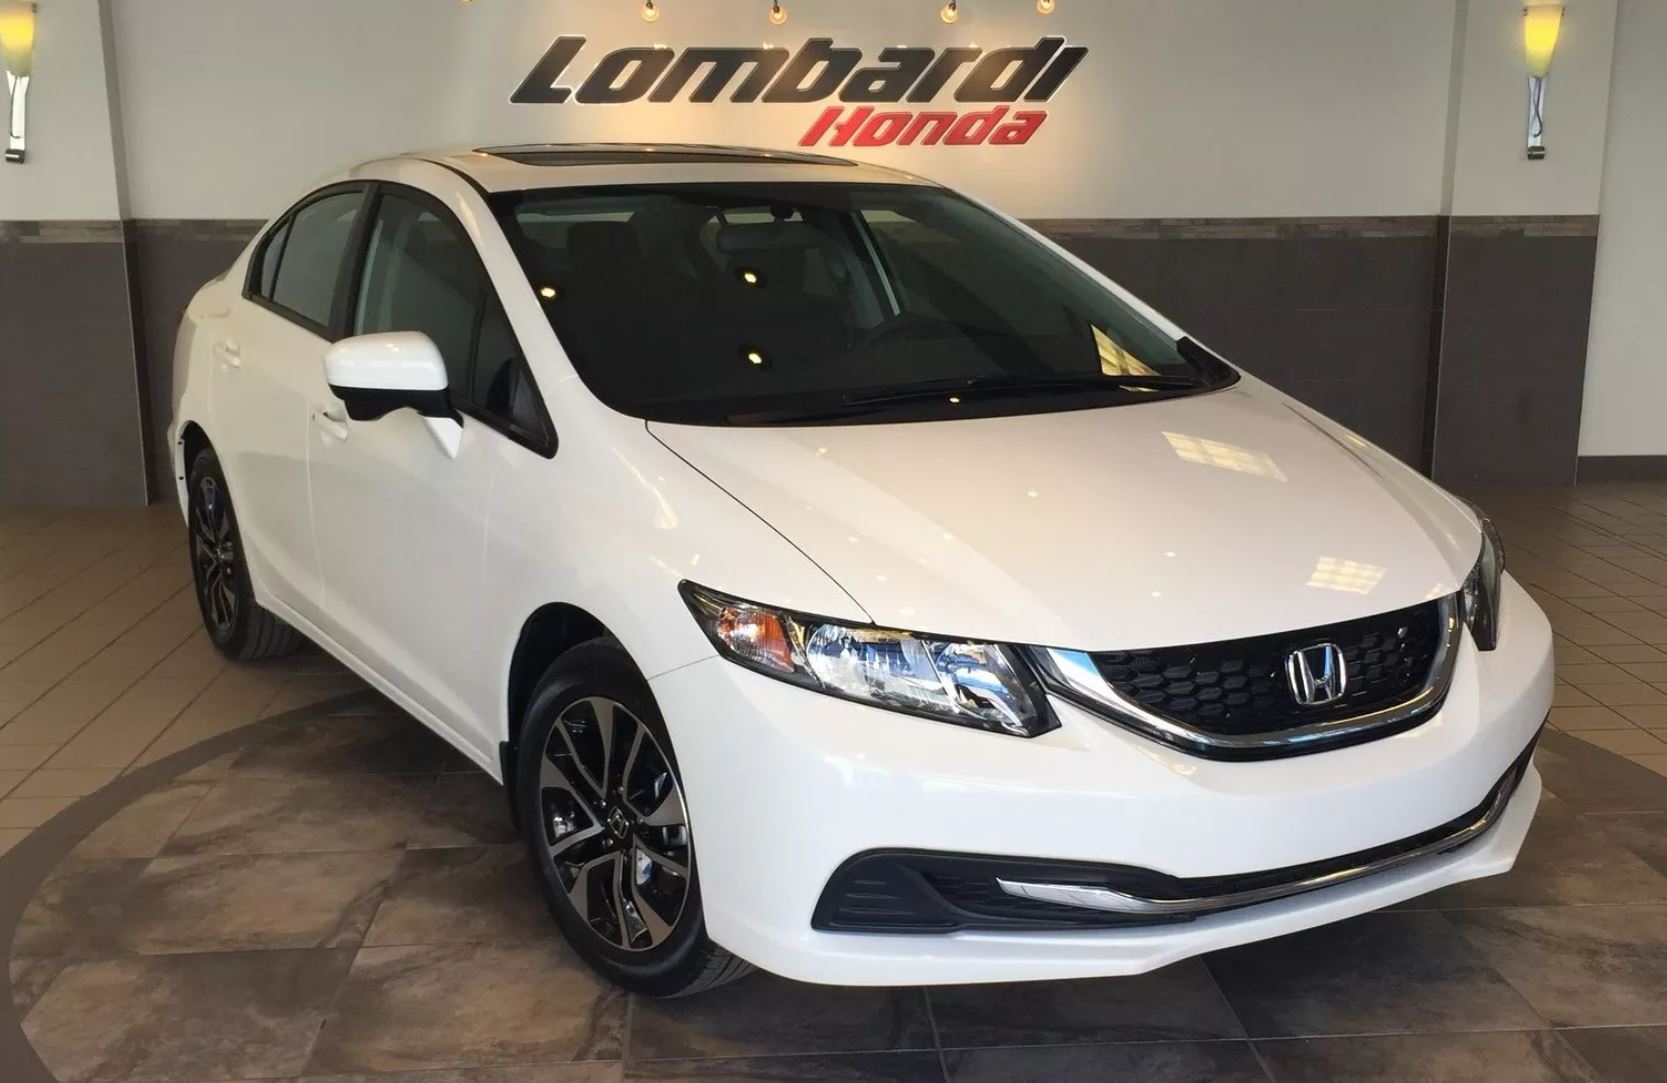 massive selection of used Honda cars, SUVs and minivans for sale in Montreal